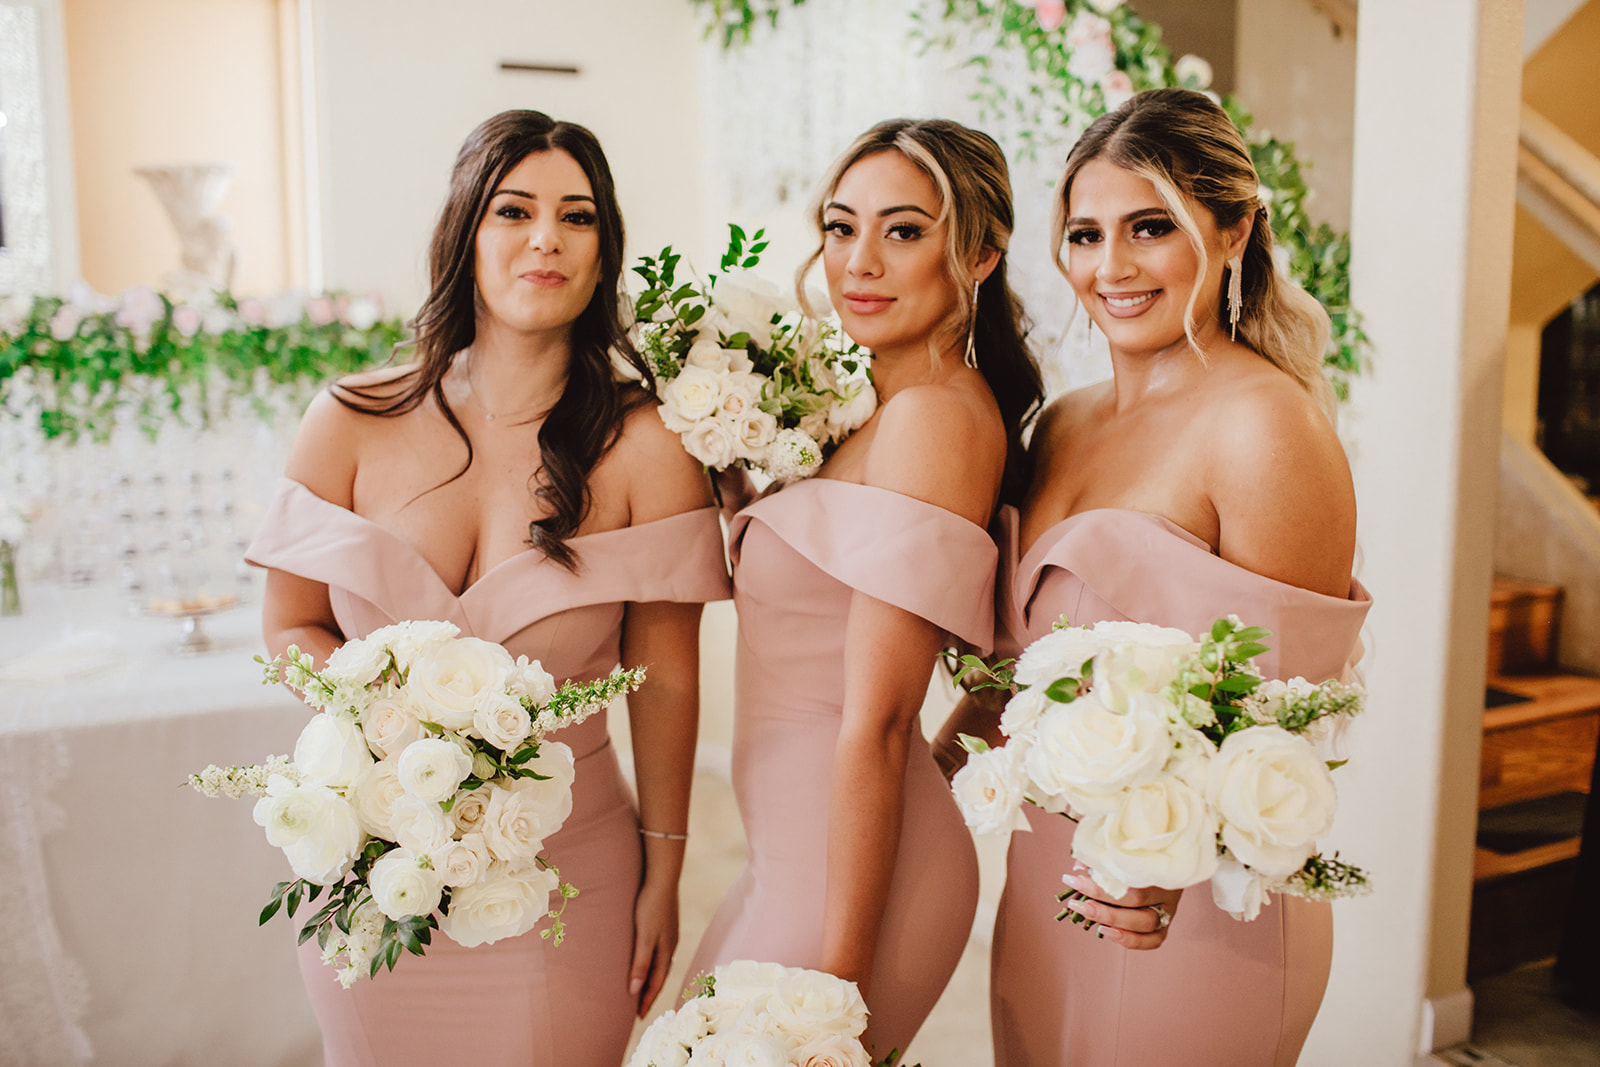 Bridesmaids with White Bouquets and Blush Bridesmaid Dresses for Fairytale Revere Country Club Wedding